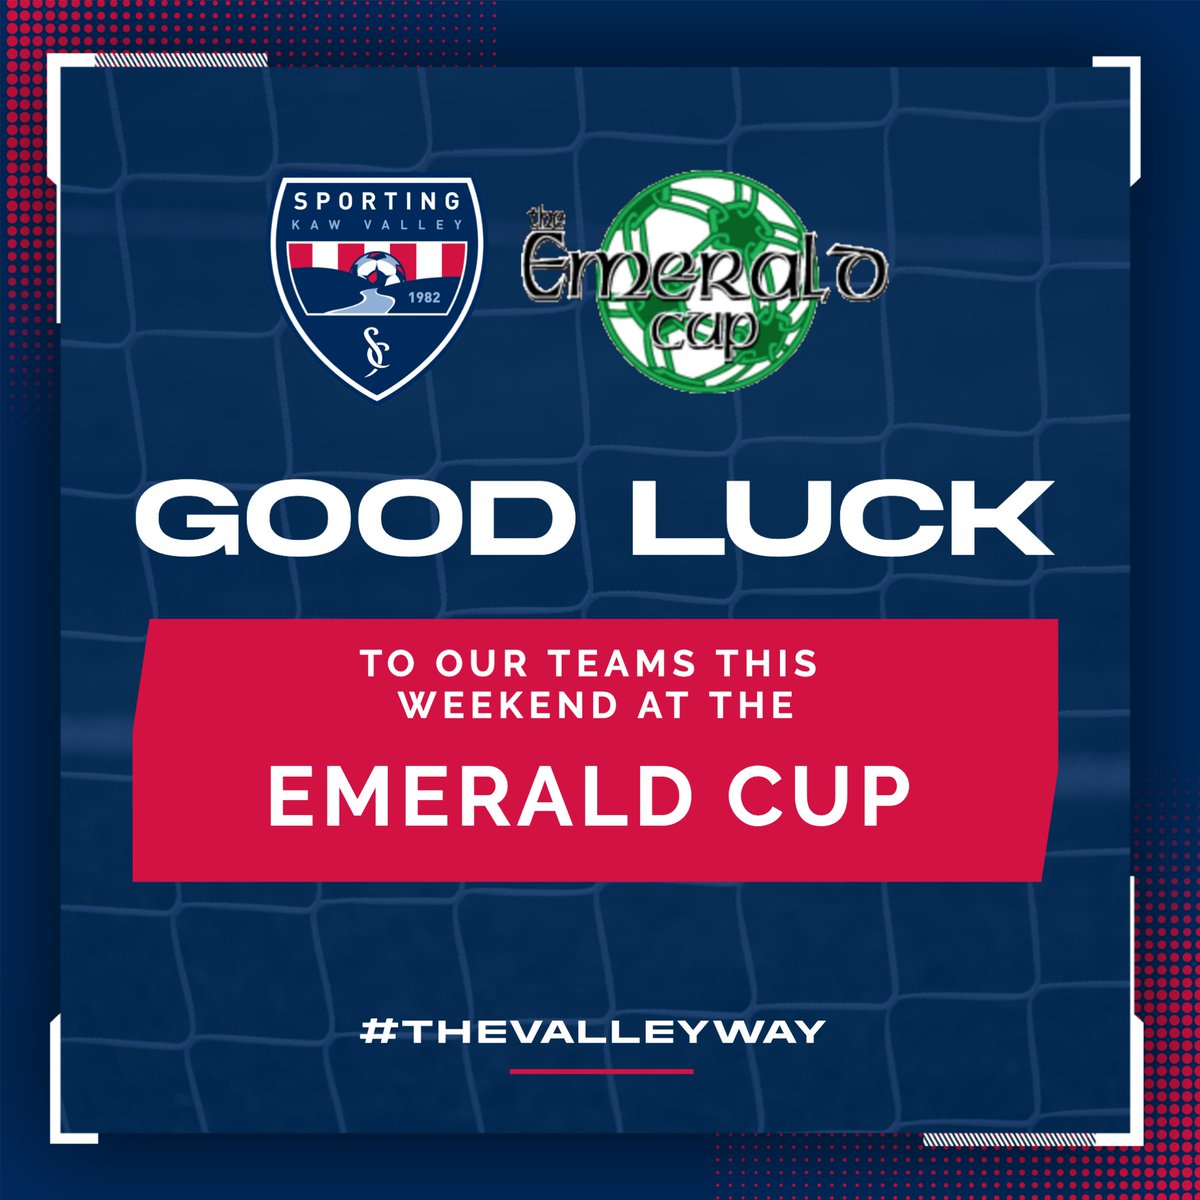 𝙂𝙤𝙤𝙙 𝙇𝙪𝙘𝙠 to all of our teams competing in the @challengerhq Emerald Cup this weekend! 🤩

#TheValleyWay | #SportingKC

#manhattanks #topekaks #kusoccer #kstatesoccer #jayhawksoccer #threecitiesoneclub #playerdevelopment #playfirst #hometownclub